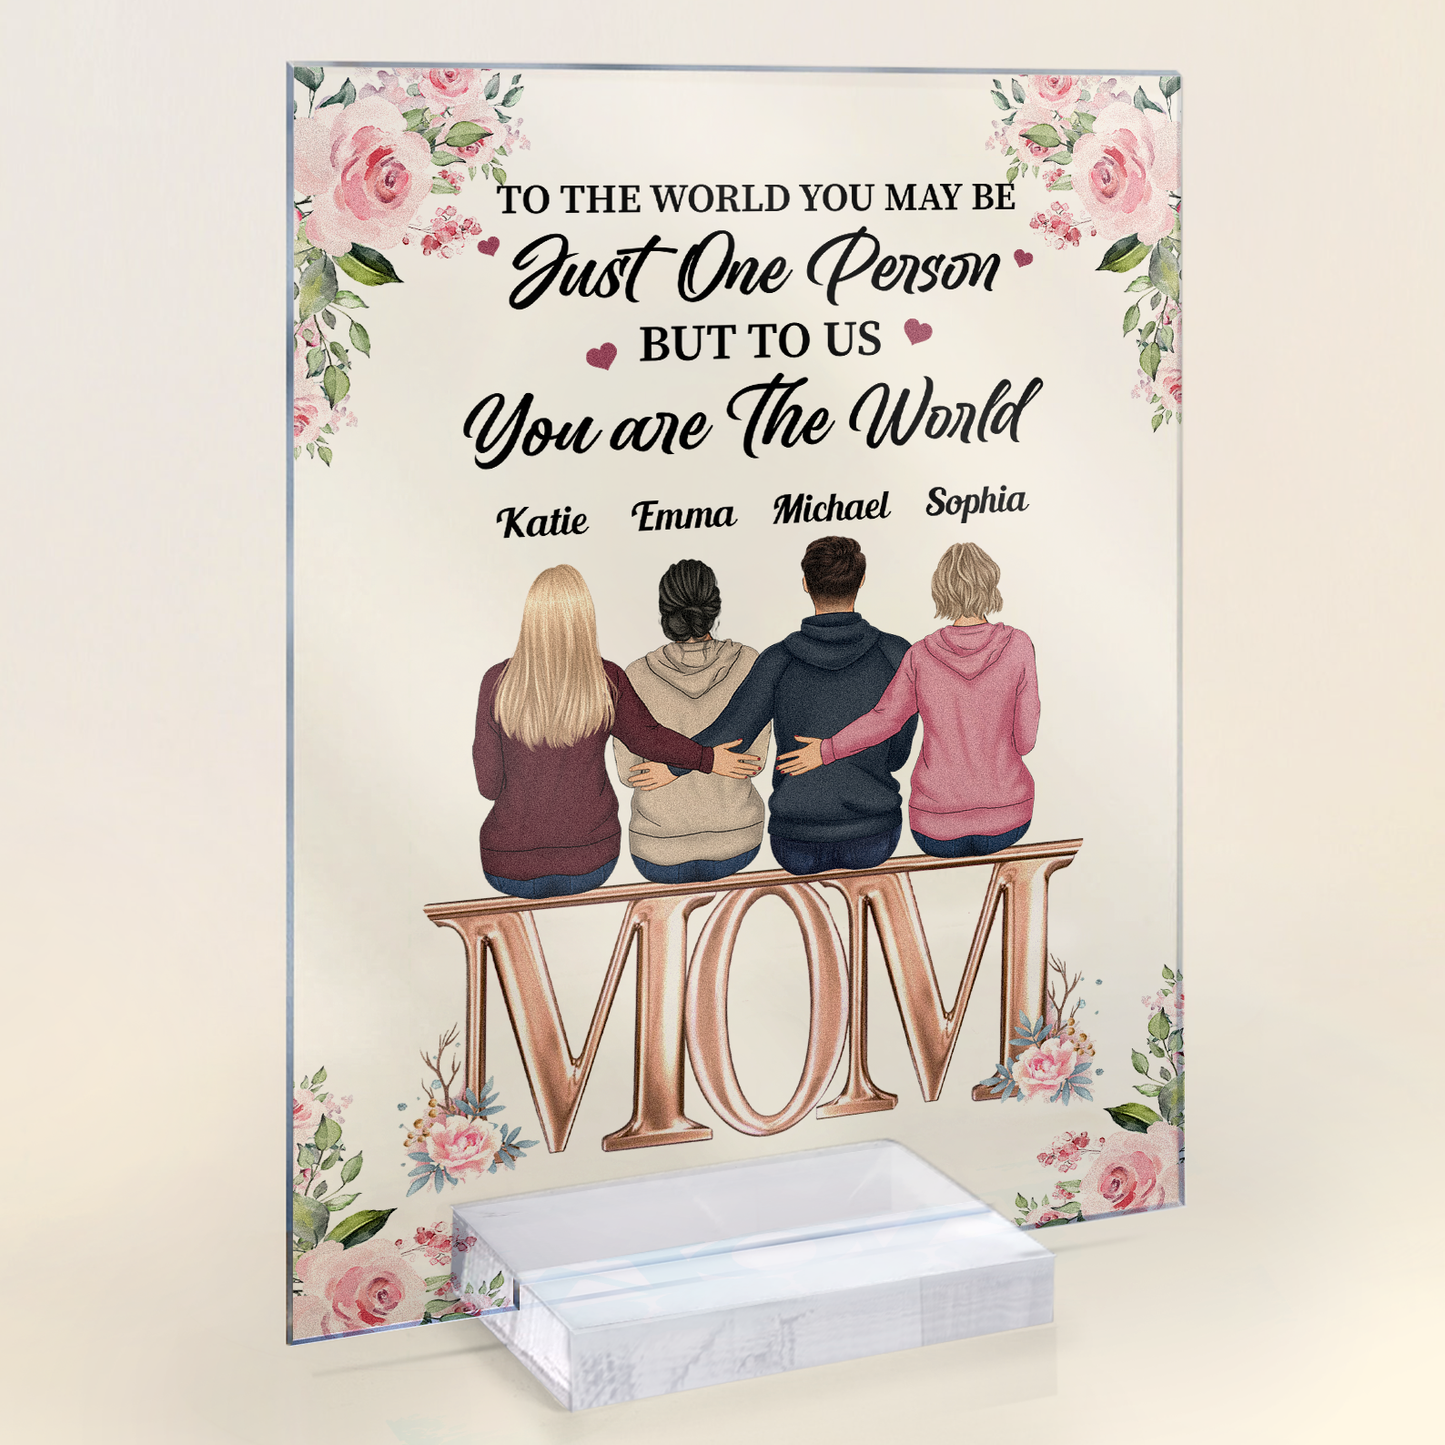 Mother And Daughter - Personalized Acrylic Plaque – Macorner